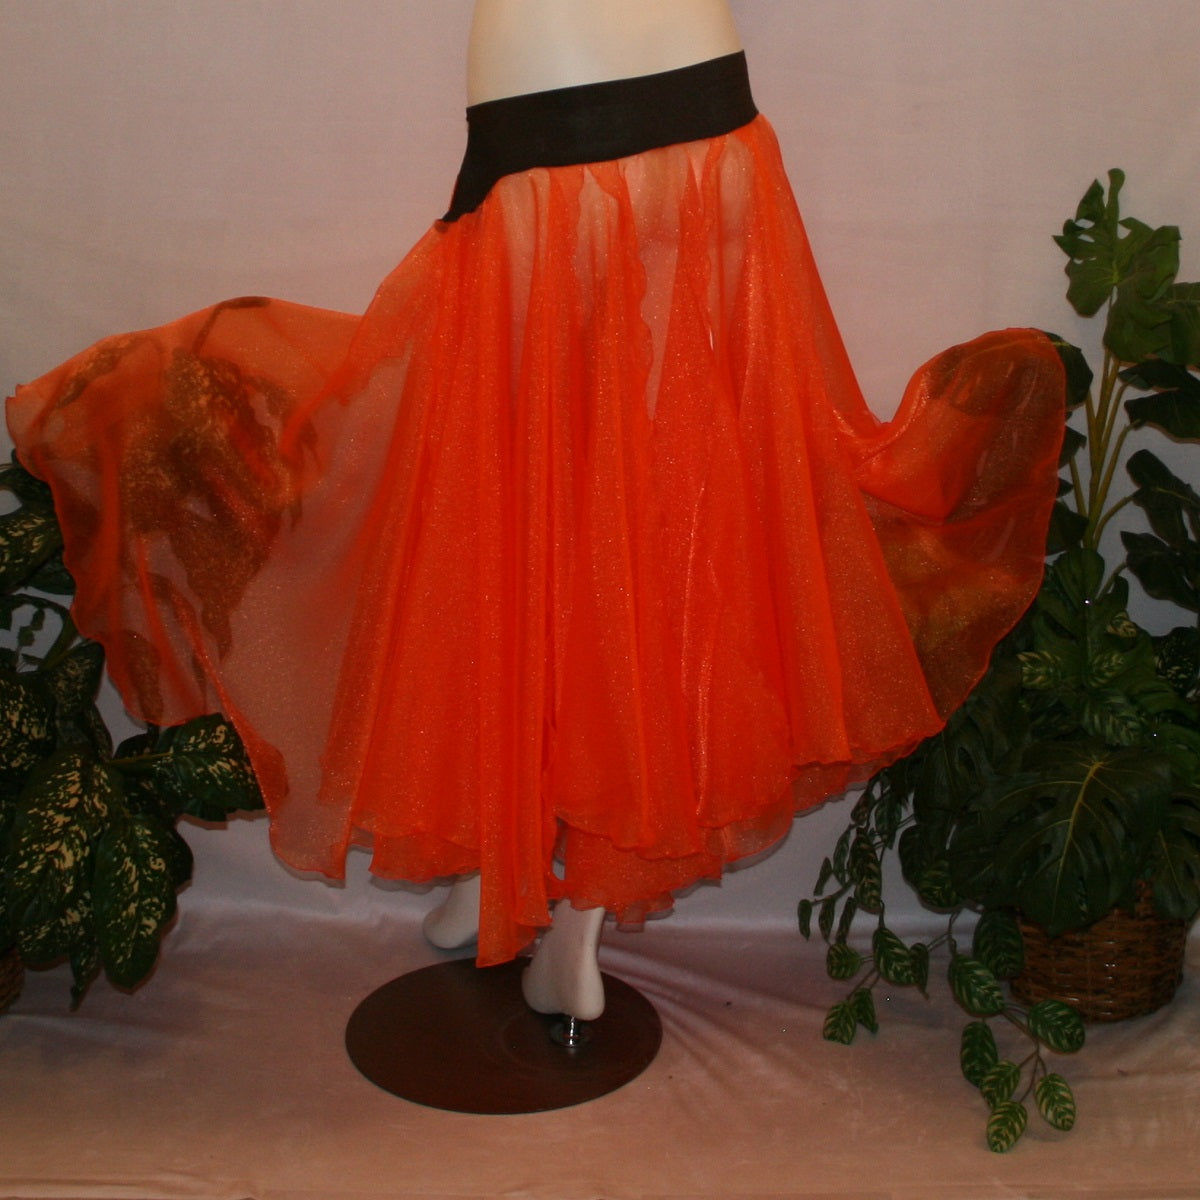 back view of Orange ballroom skirt in yards of large petal shape panels of orange organza with a brown waistband to pair with one of our Fall Flowers dresses to create a converta ballroom dress.   The skirt can be custom made in many other colors.